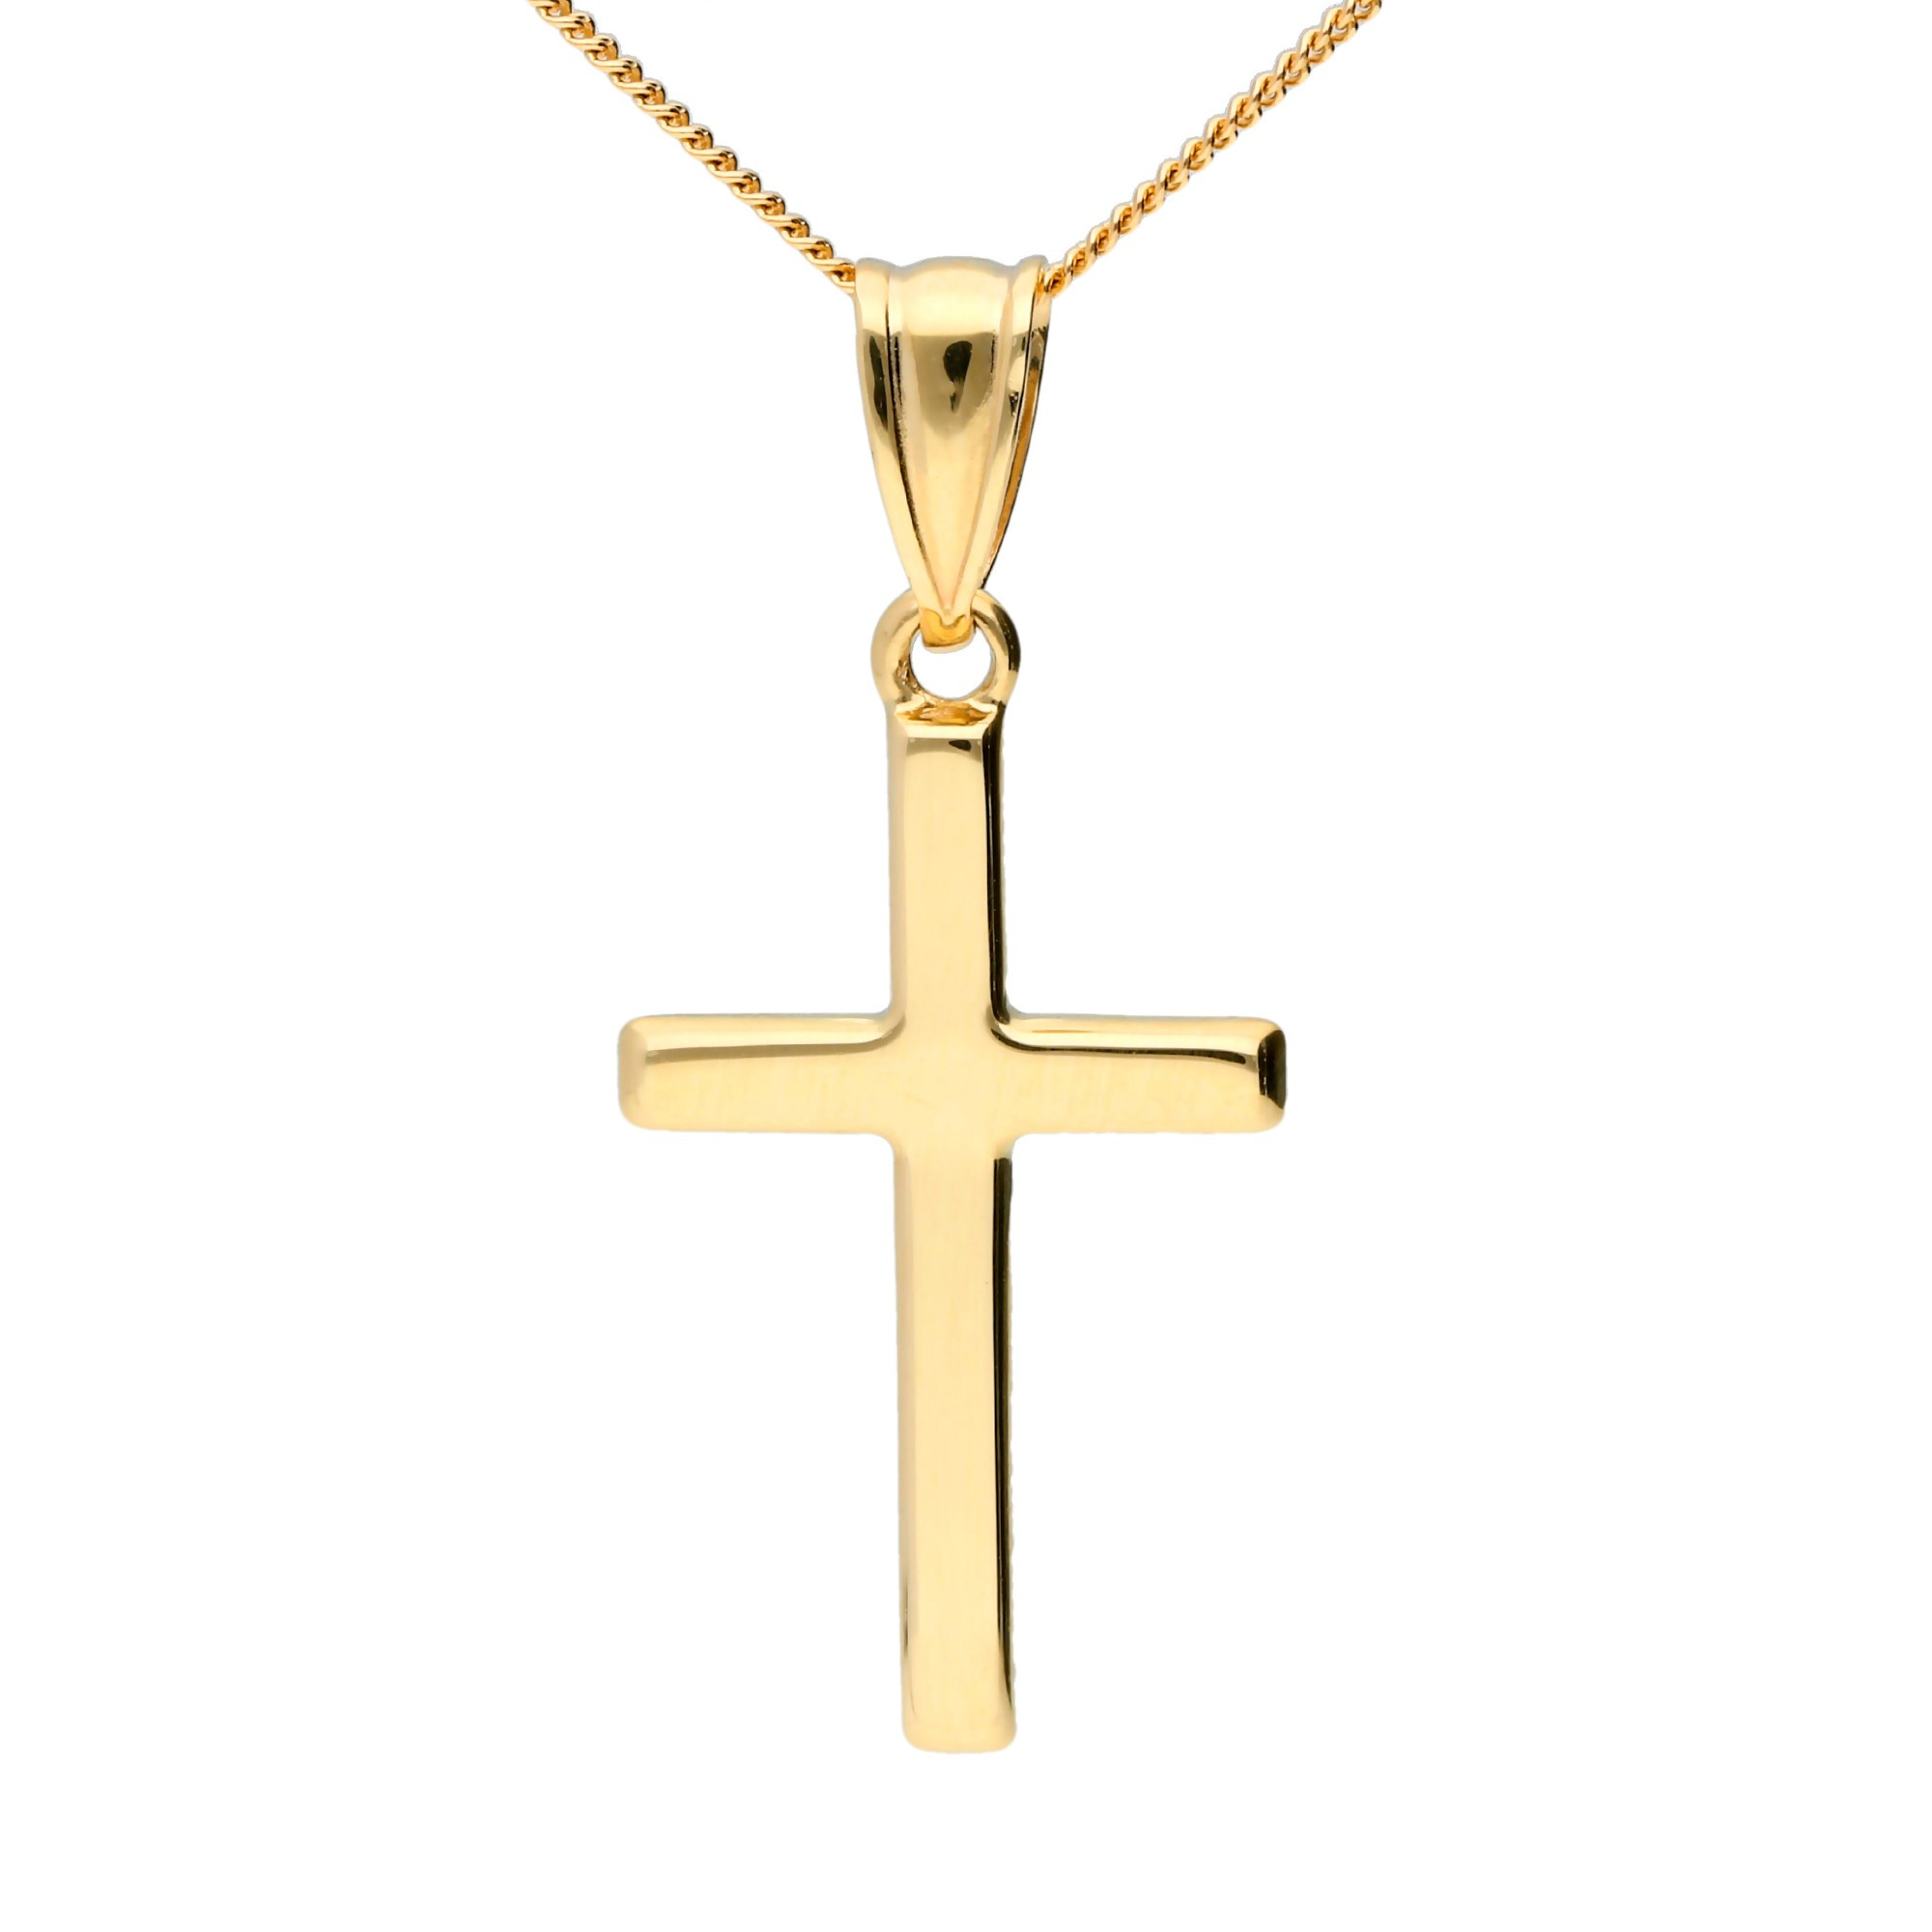 Gold Cross Charms H-398 Large 14k Gold Filled CZ Micro Pave Gold Cross Shape Pendant